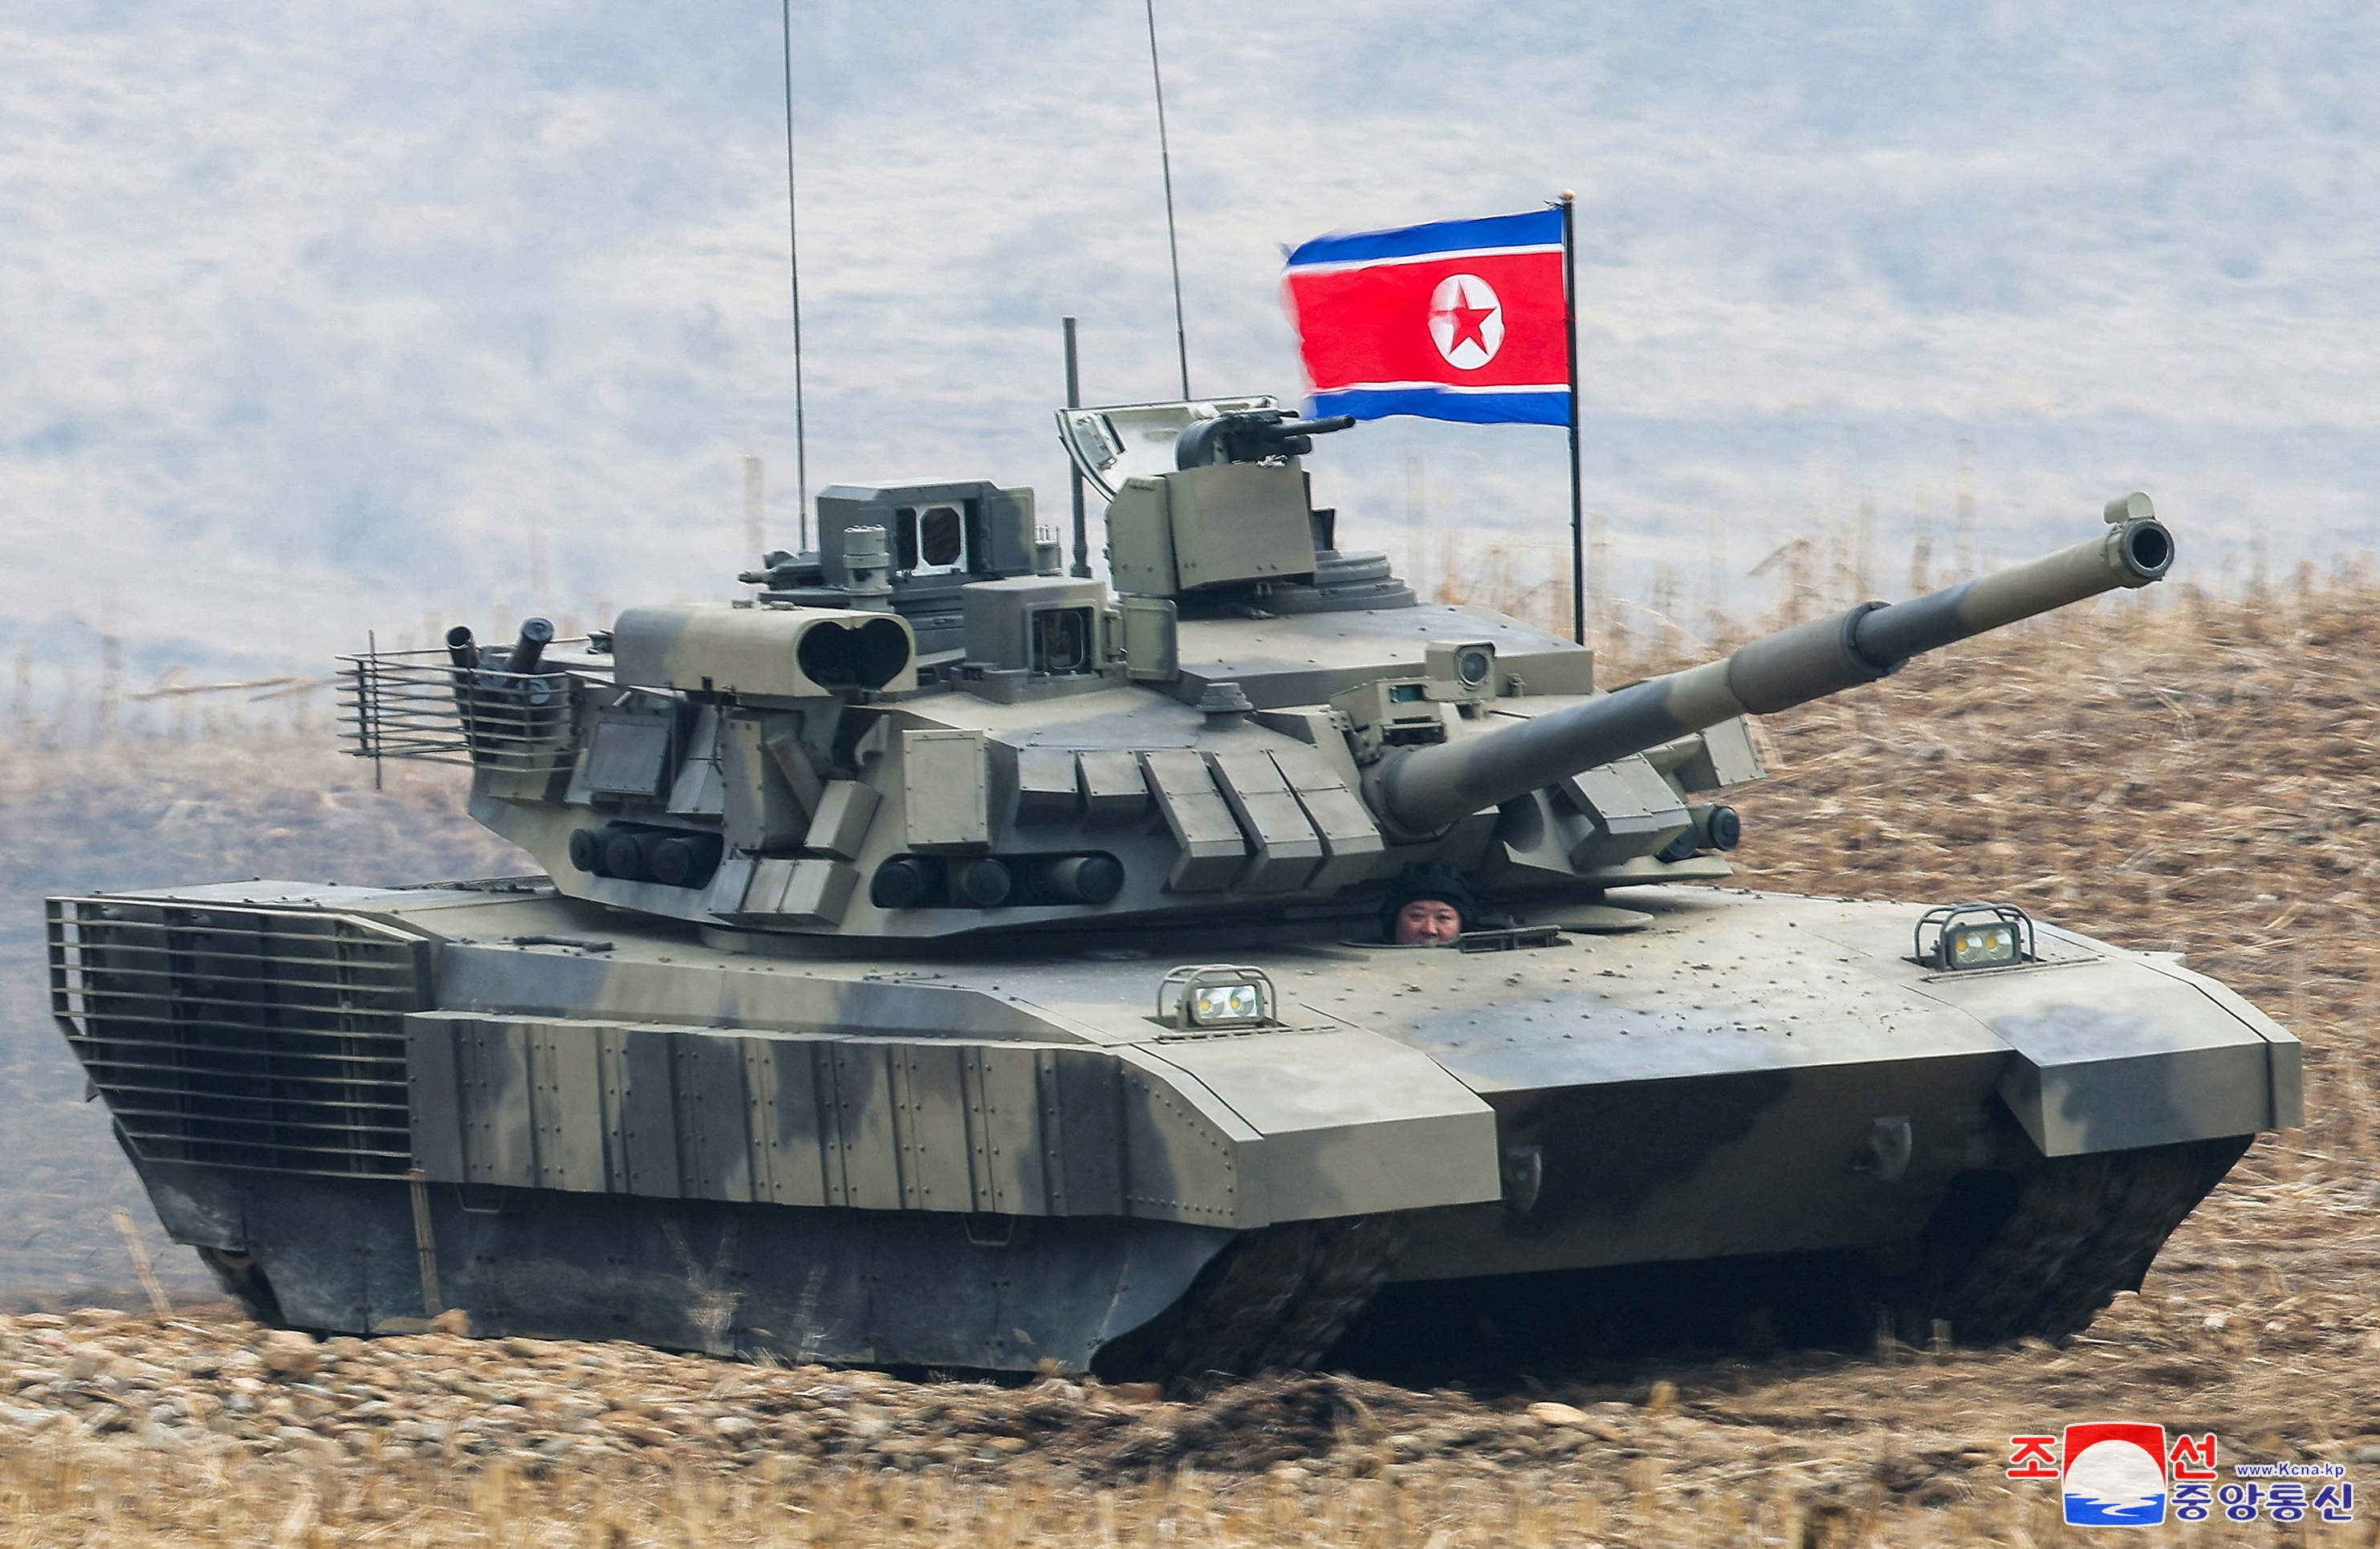 Military Experts Question New Russian Tank Capabilities